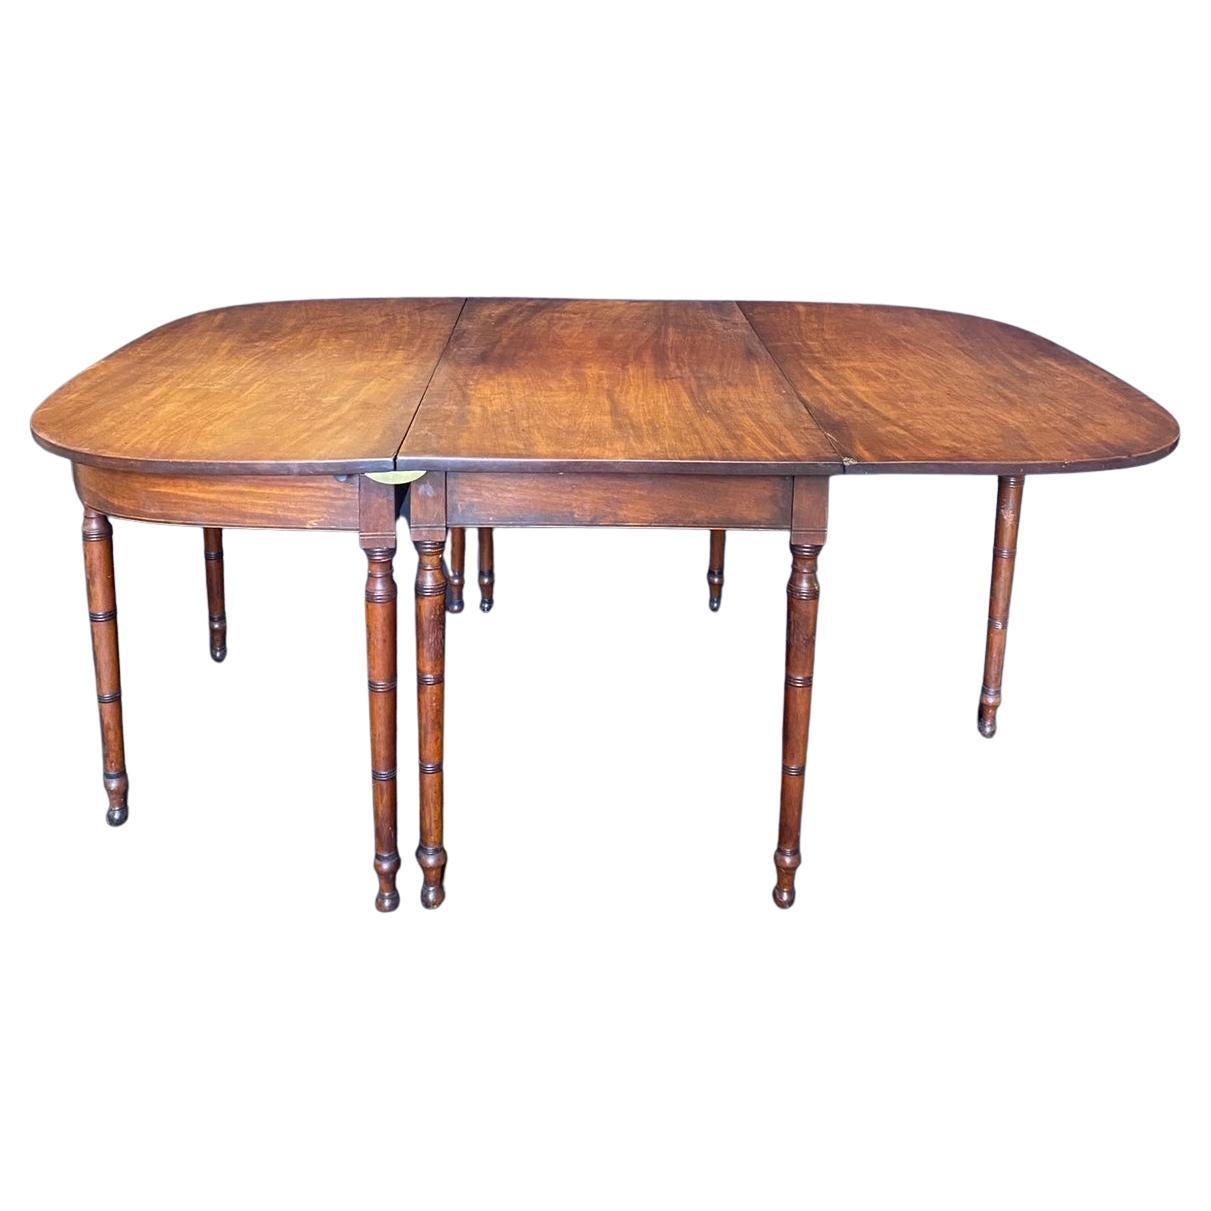 Early American Primitive Maple Harvest Expandable Dining Table For Sale